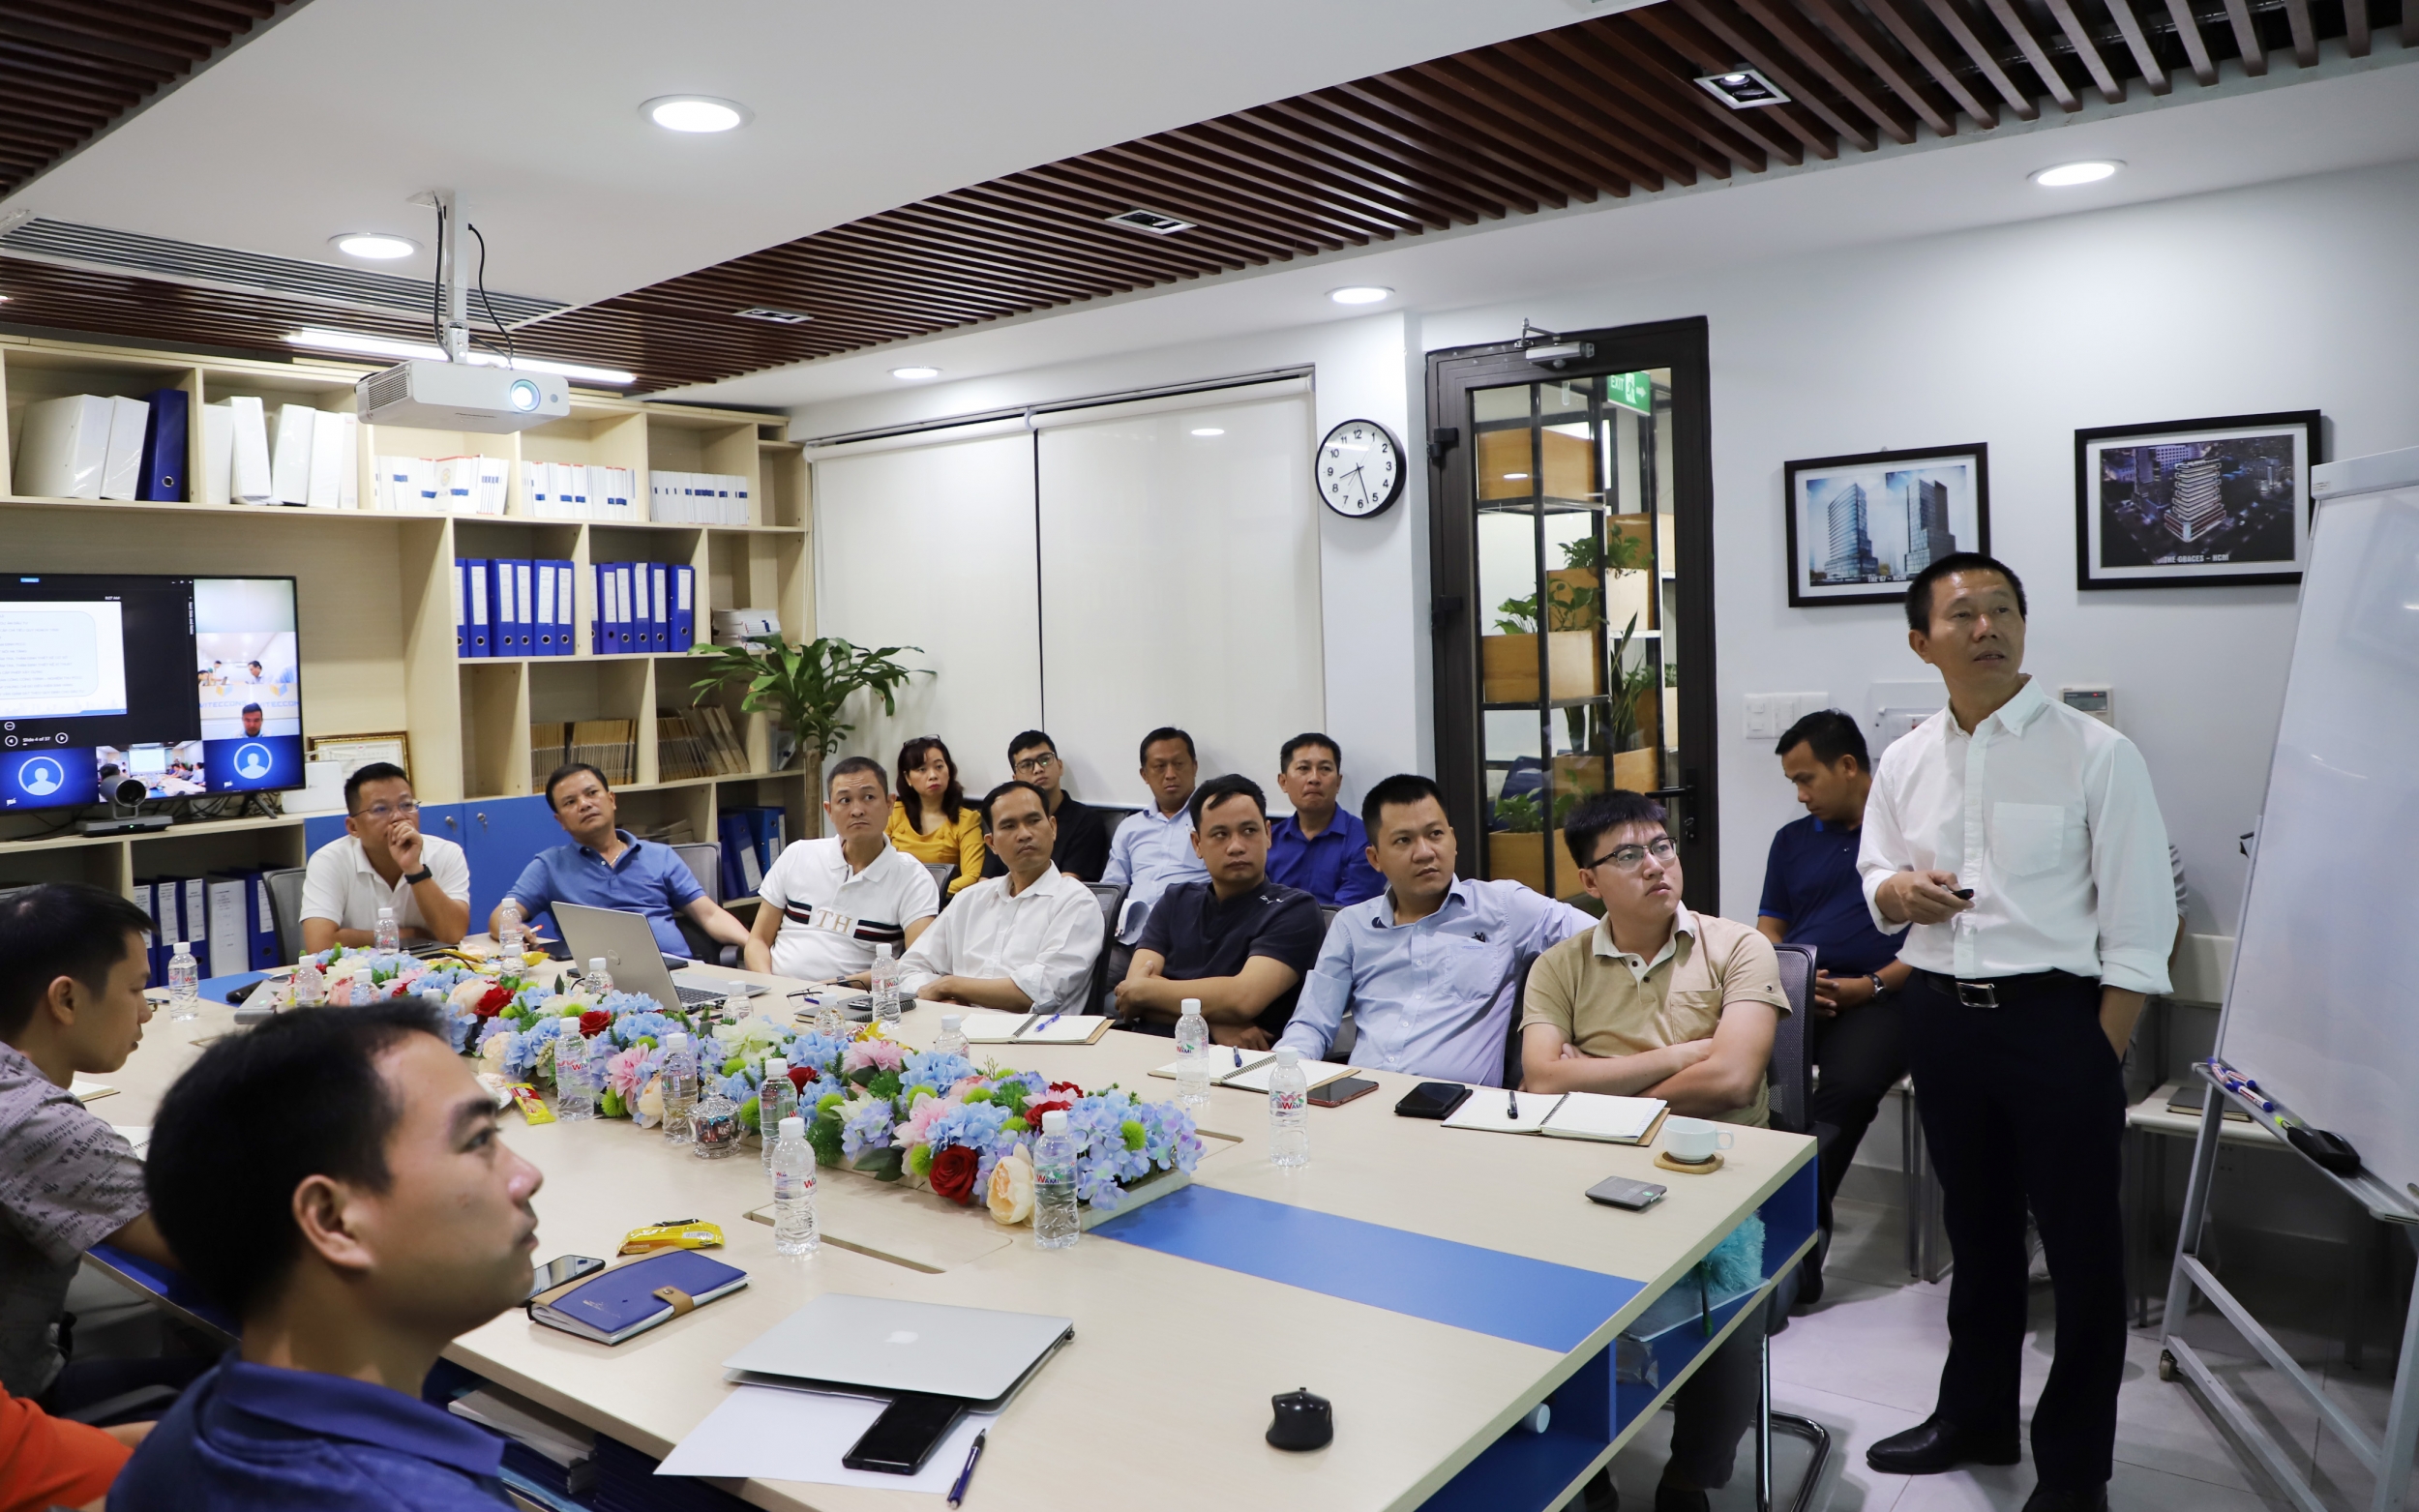 ENERAL DIRECTOR PHAN HUY VINH COACHED THE SUBJECT OF "HOW TO EXECUTE DESIGN & BUILD PROJECTS" IN CONSTRUCTION FIELD